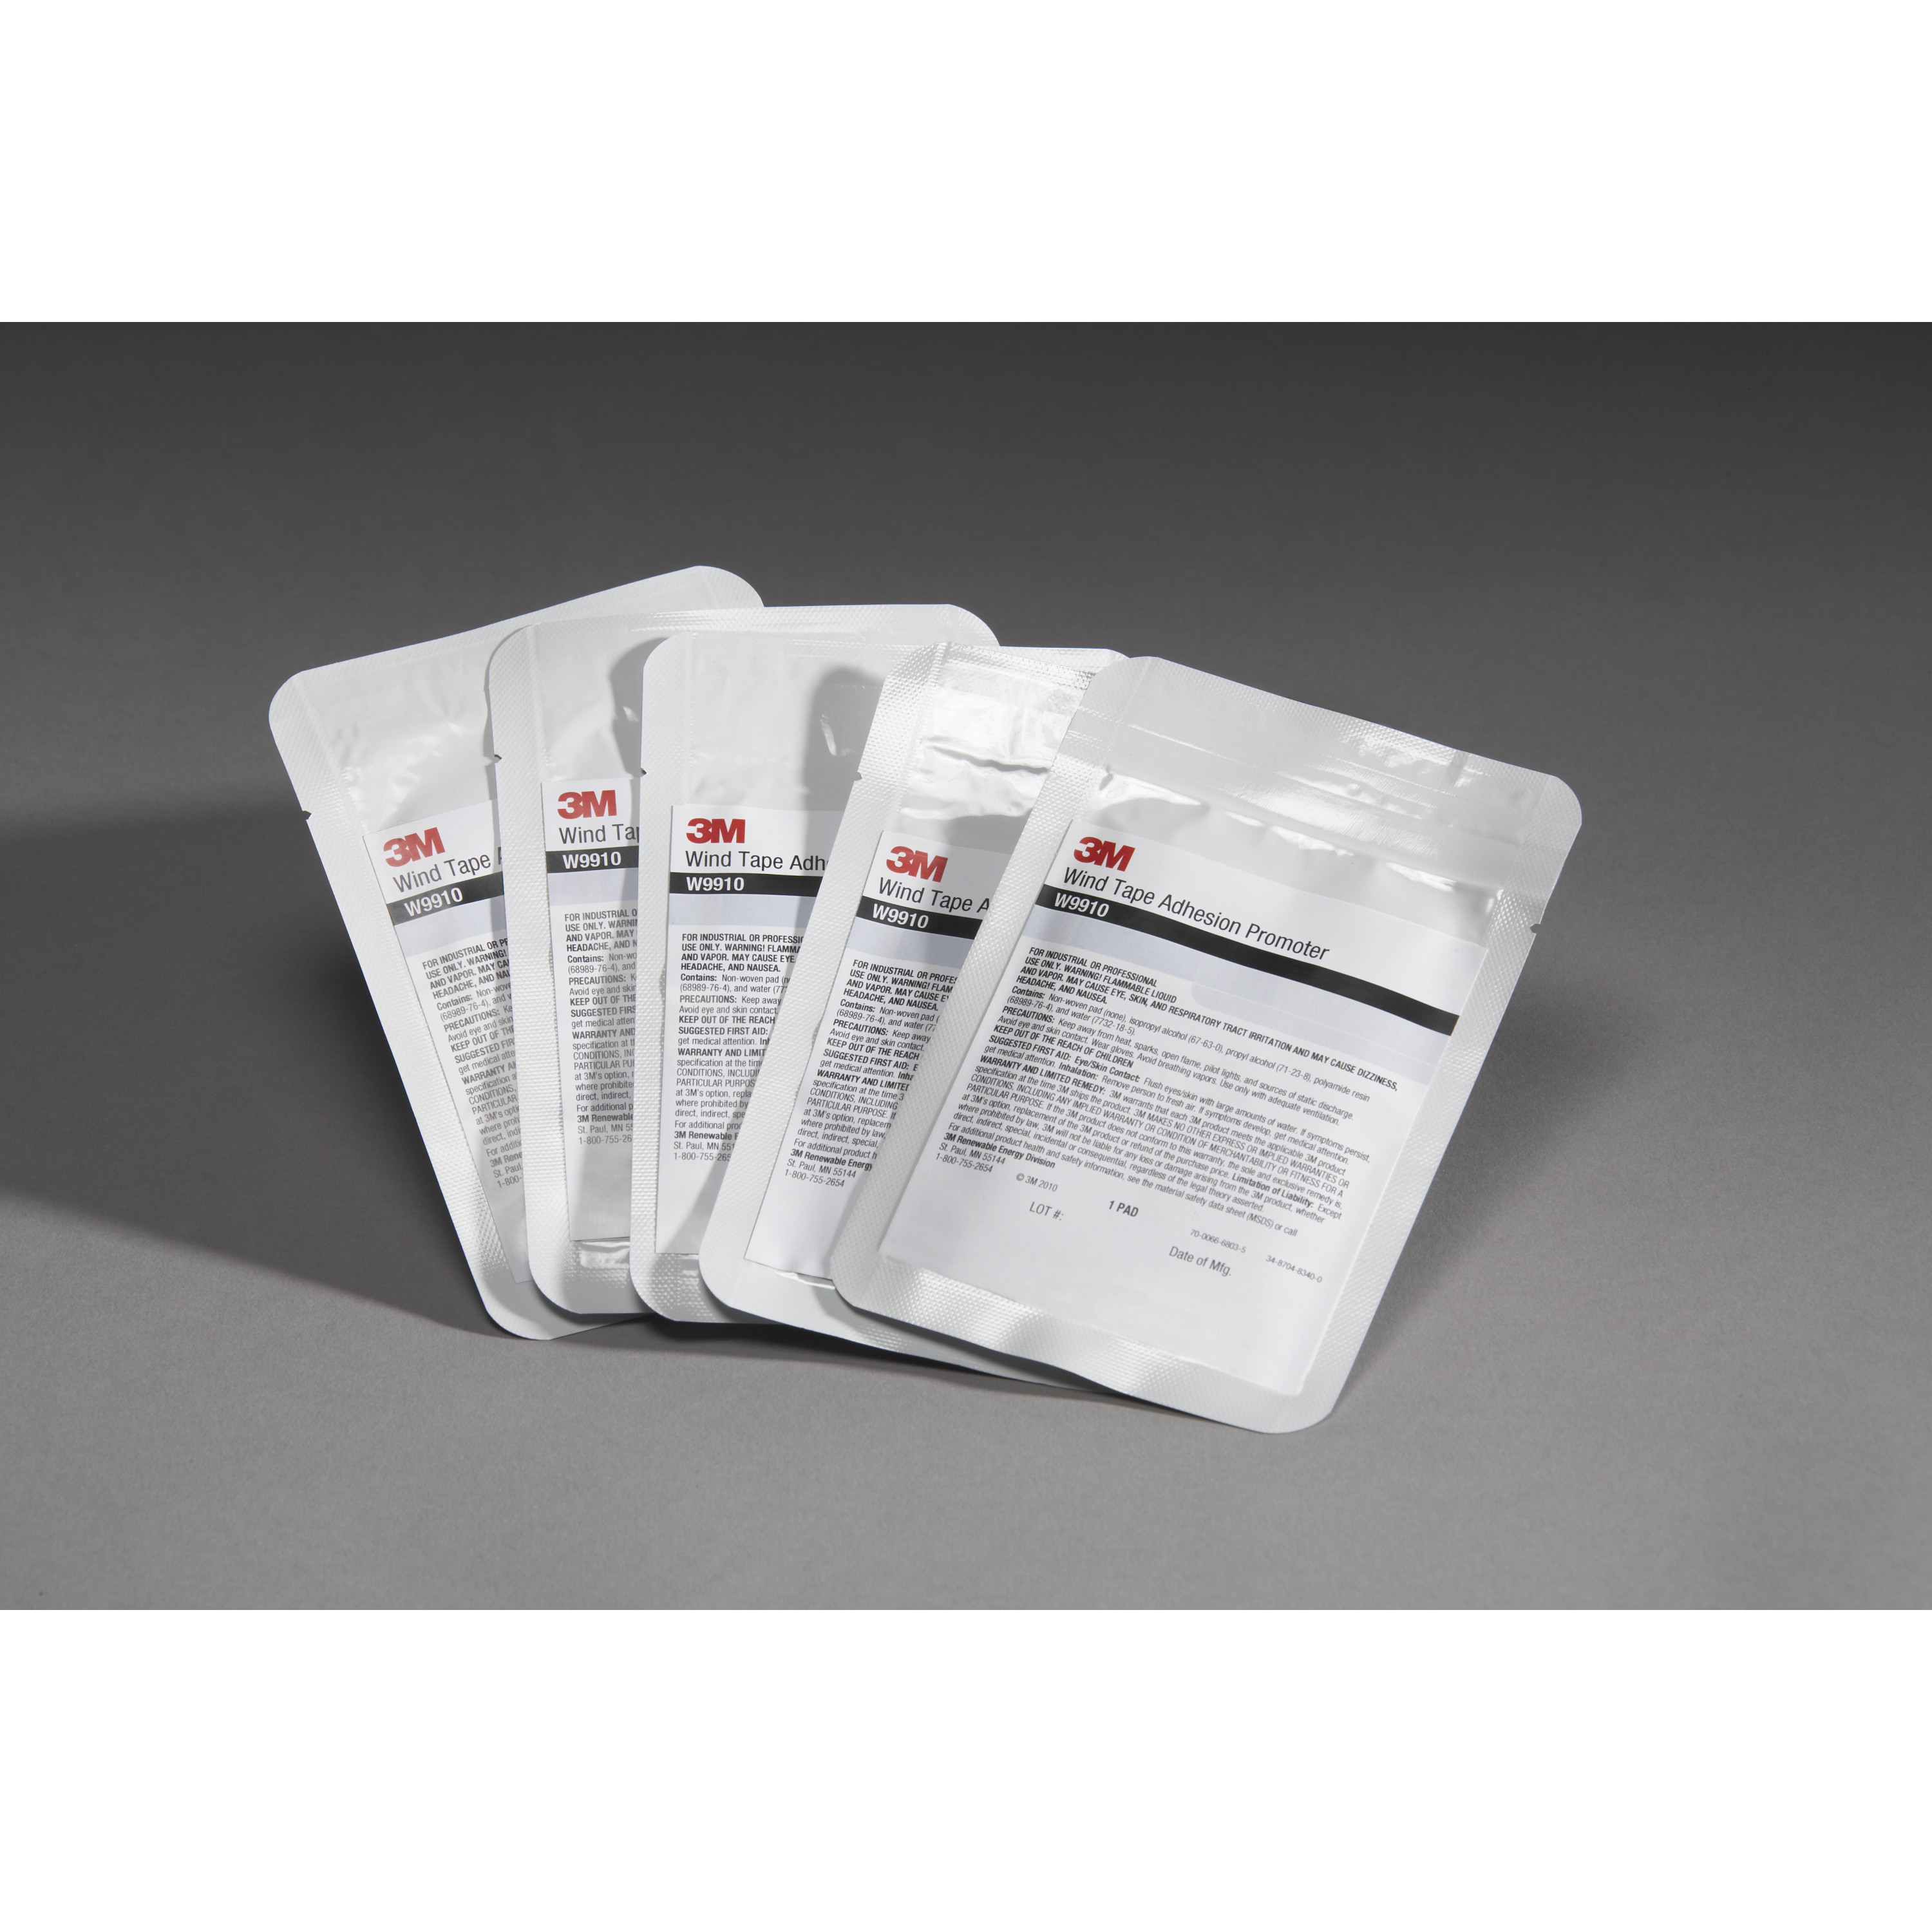 3M™ Wind Tape Adhesion Promoter W9910, 7 in x 7 in, 5 Packets/Pouch,
5/Case